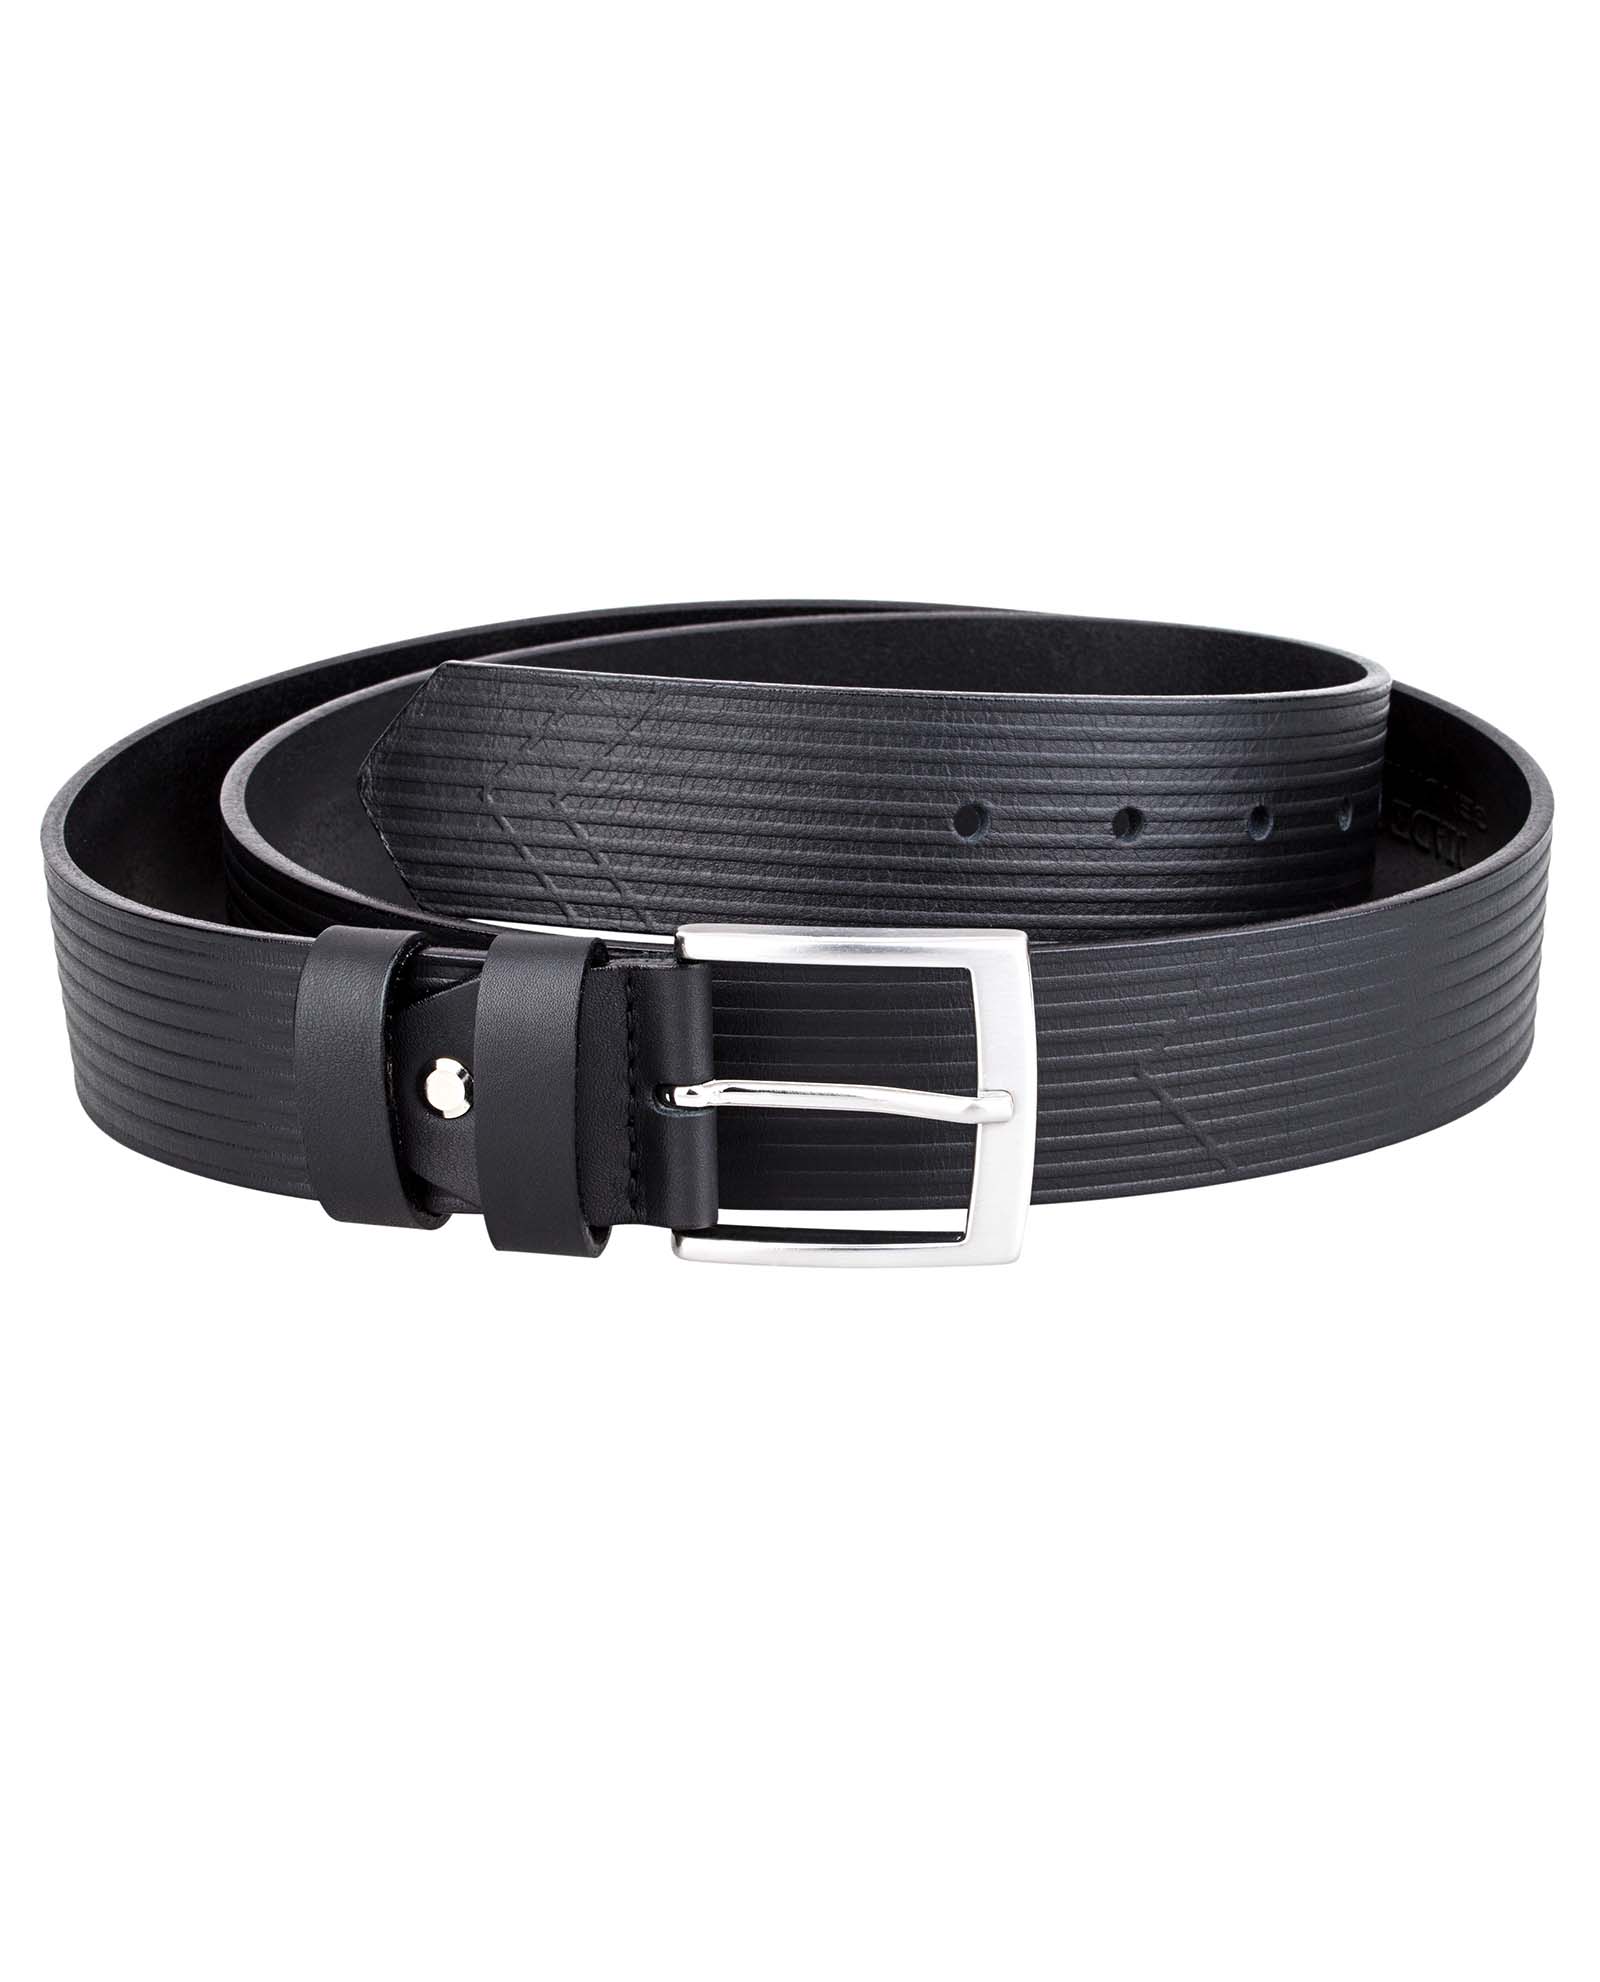 Leather Belt 1.5 inch wide 